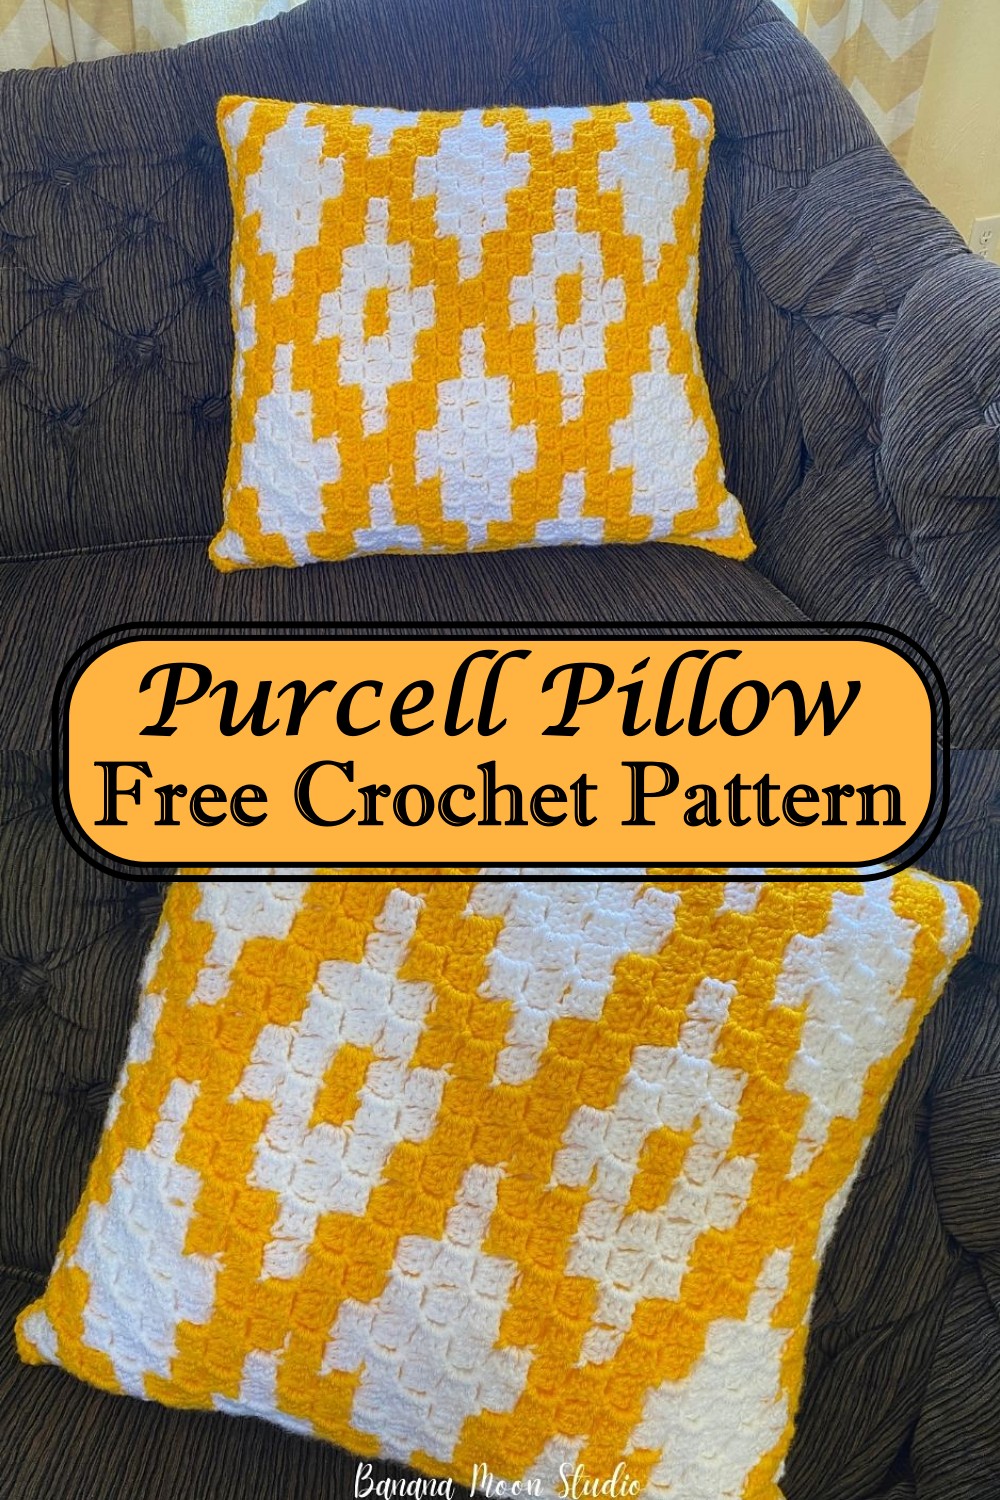 Purcell Pillow